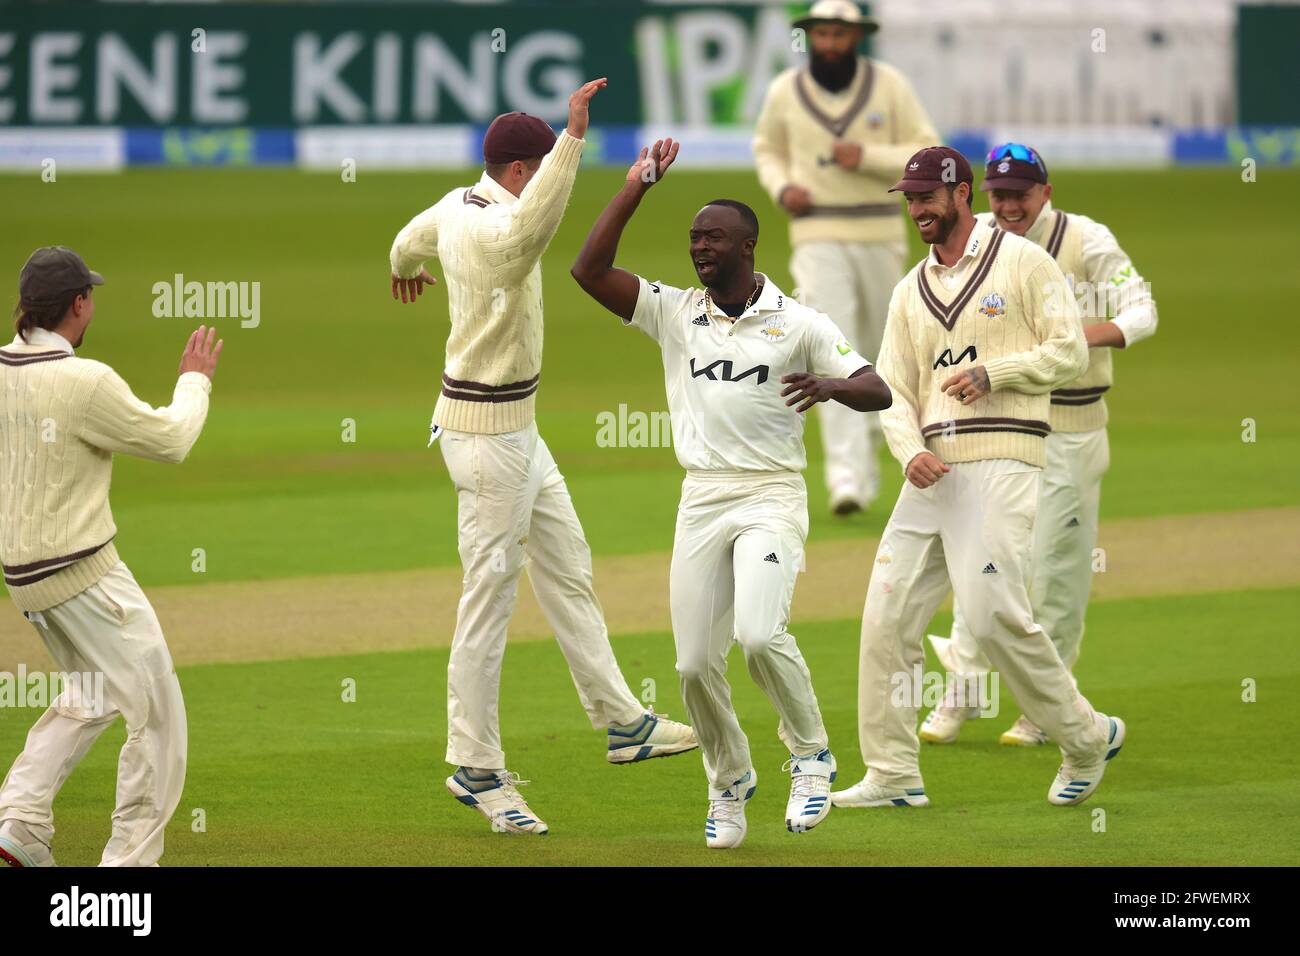 22 May, 2021. London, UK. Surrey’s Kemar Roach celebrates with team mates after getting the wicket of Sam Robson as Surrey take on Middlesex in  the County Championship at the Kia Oval, day three David Rowe/Alamy Live News Stock Photo